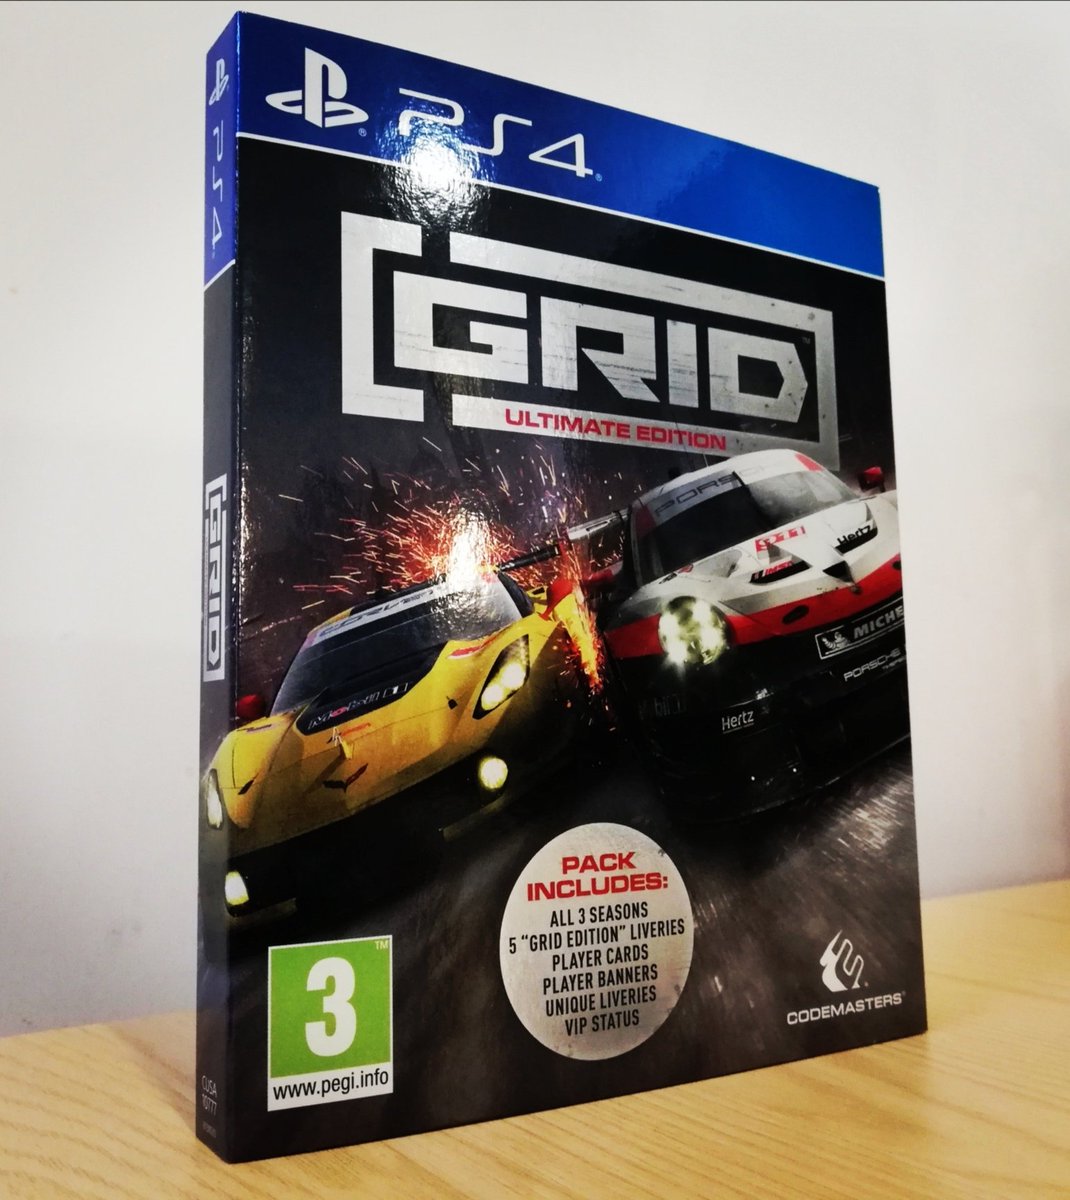 Grid Legends ps4 диск. Grid на пс4. Grid (ps4). Grid Legends Deluxe Edition ps4. Ps4 ultimate edition